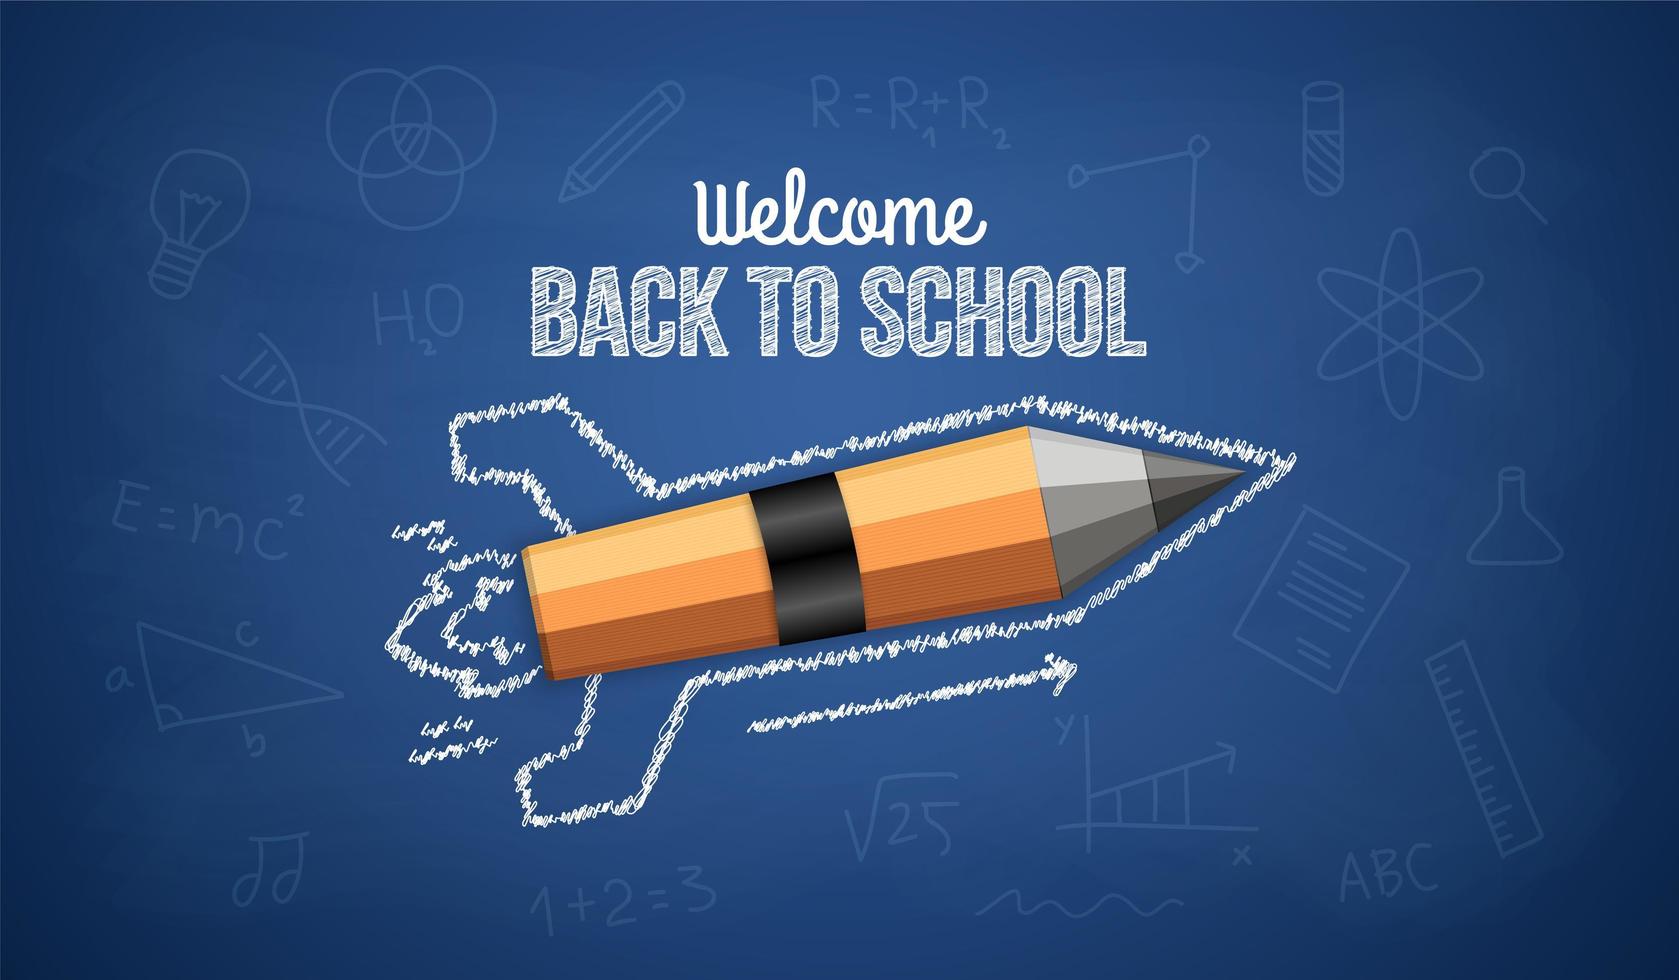 Realistic pencil rocket launching on blue board, concept of welcome back to school background vector